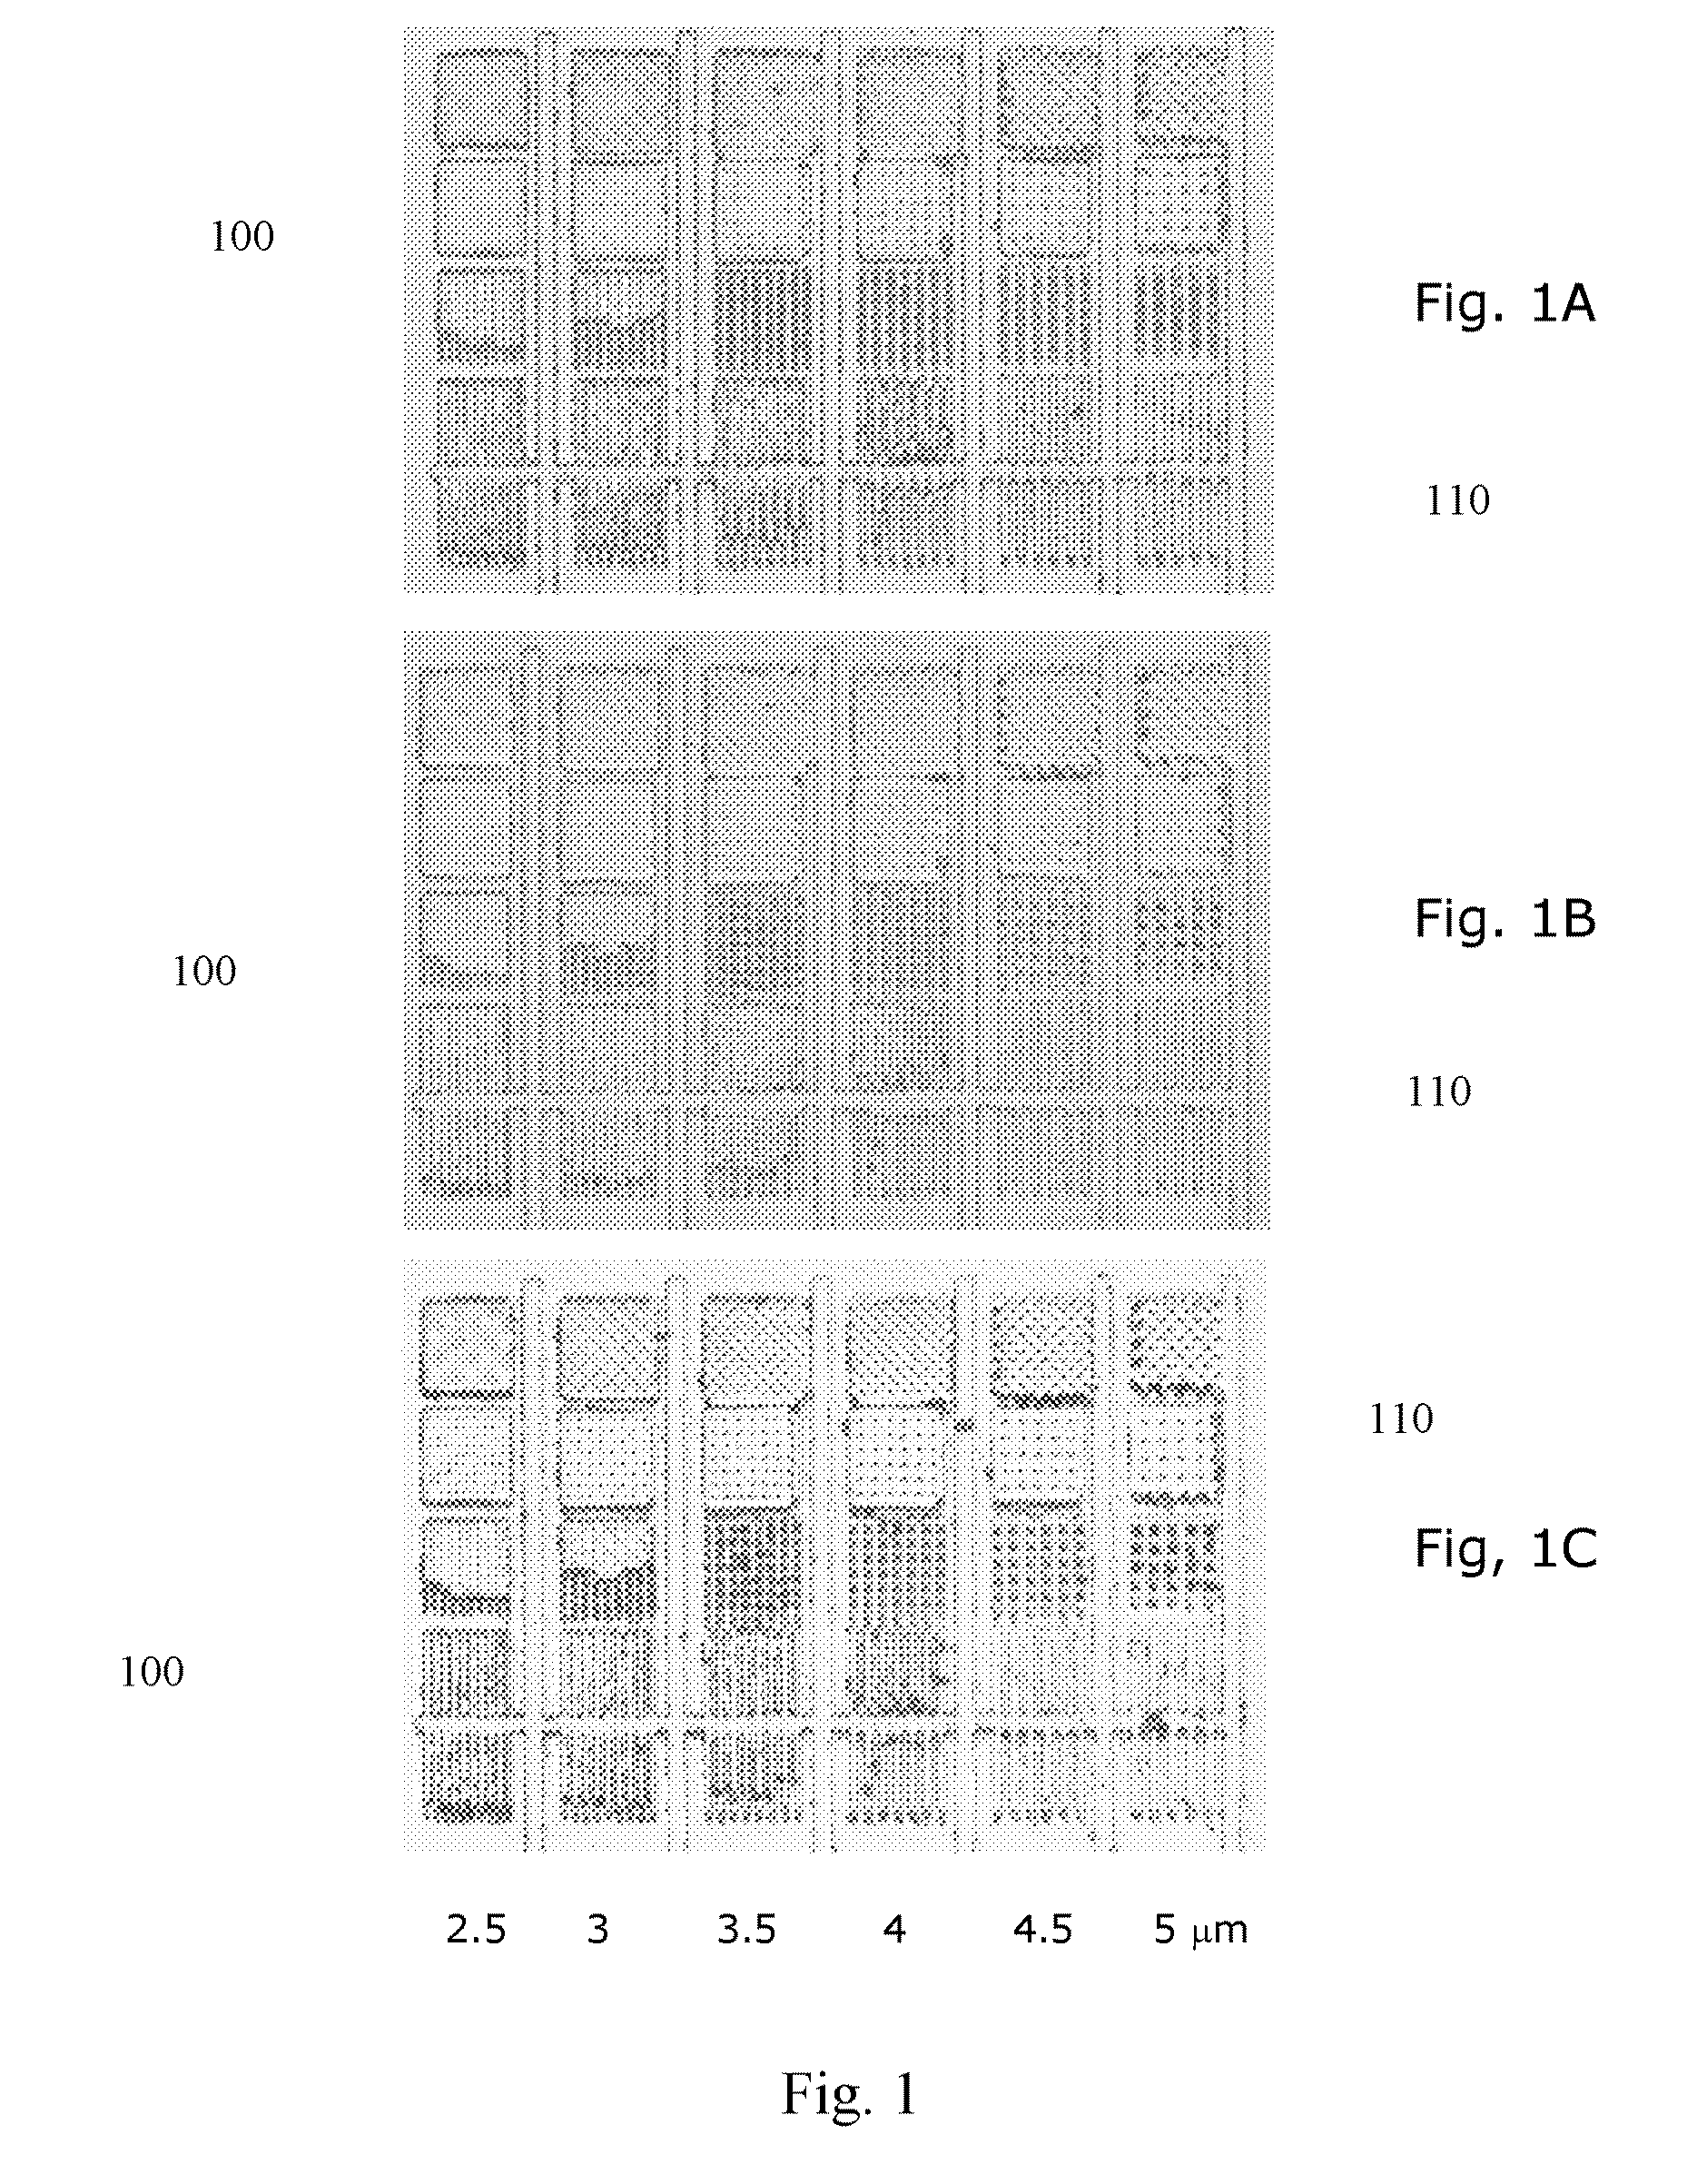 Laminated microfluidic structures and method for making